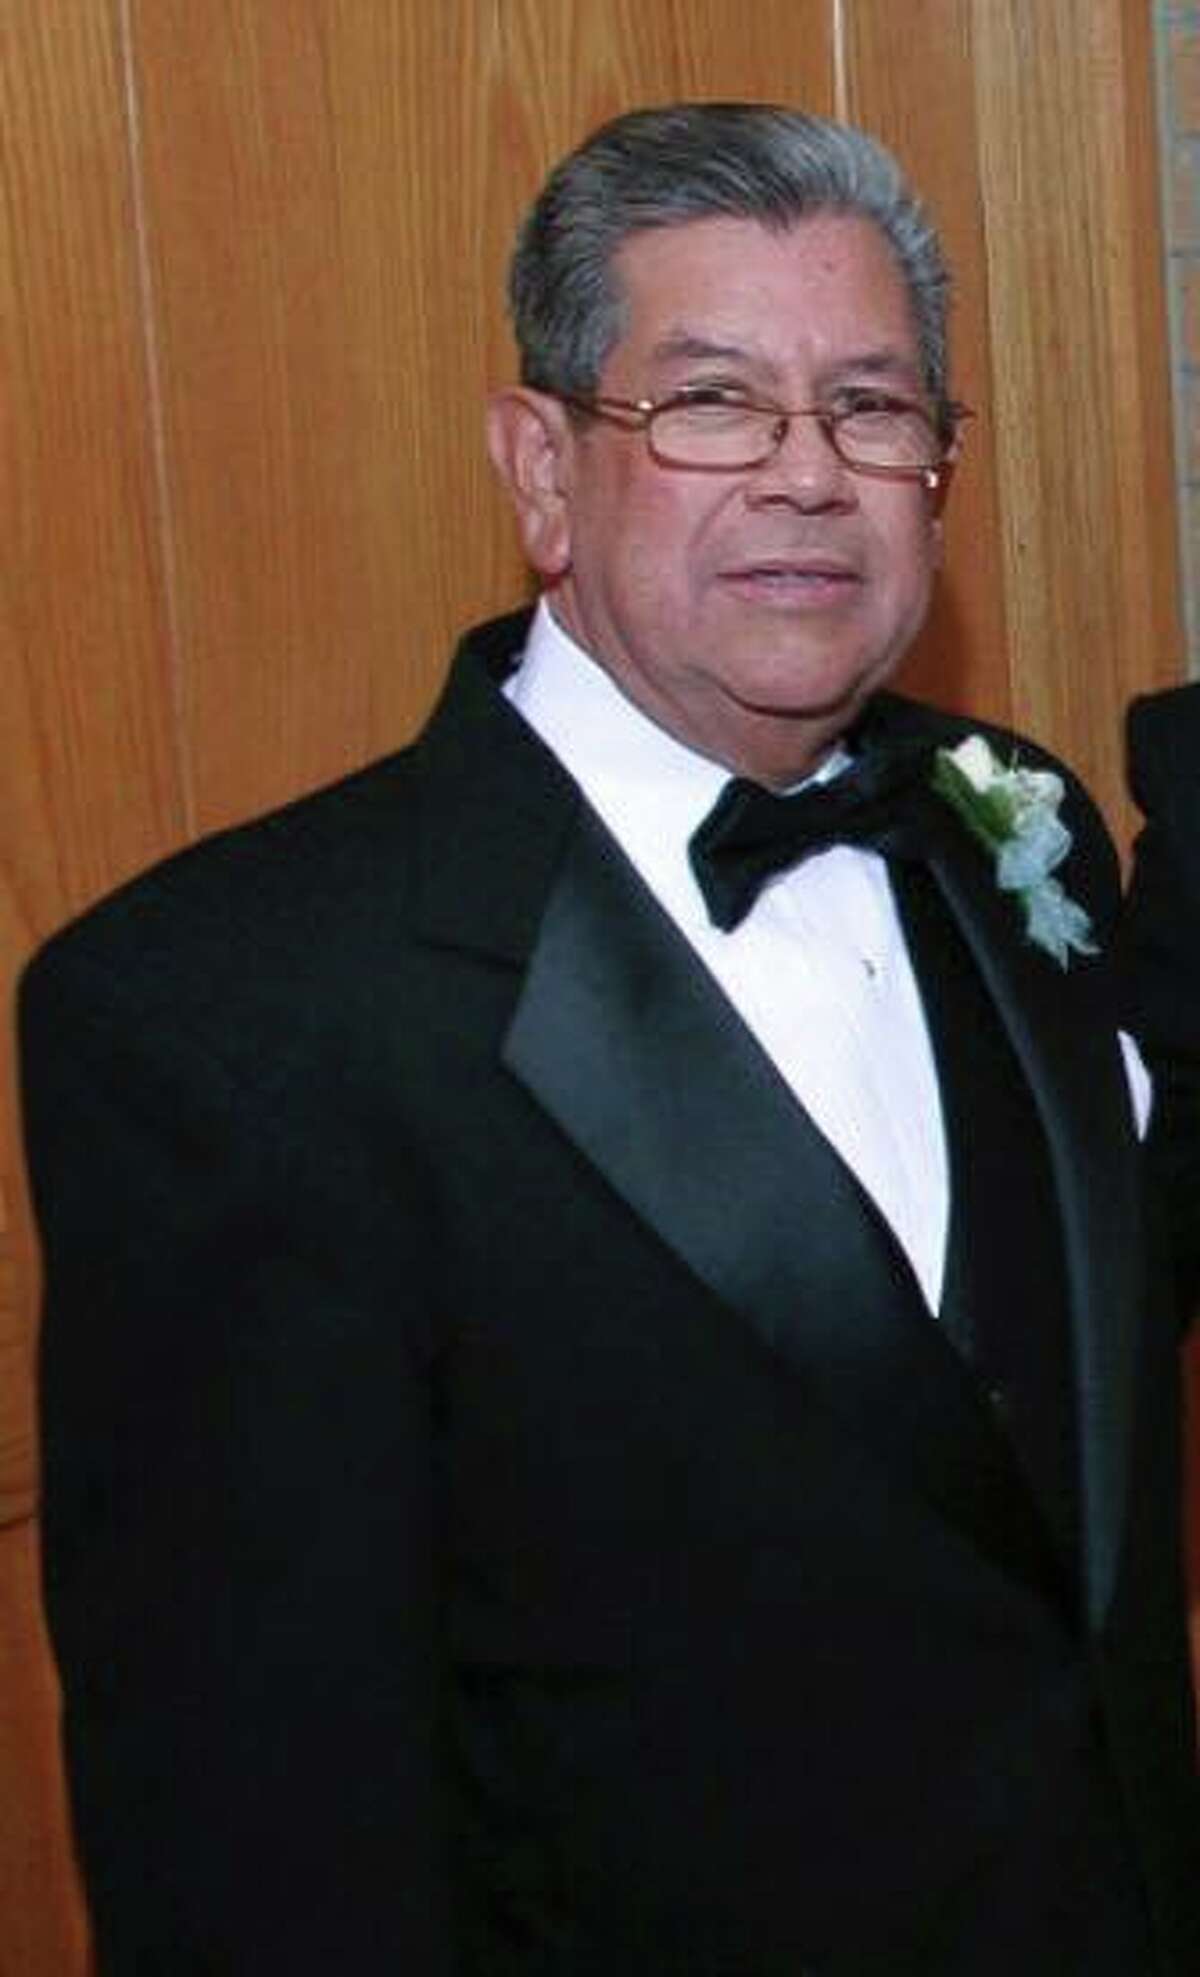 Robert Esparza, 68, was killed on Oct. 15 in his home during an apparent robbery.